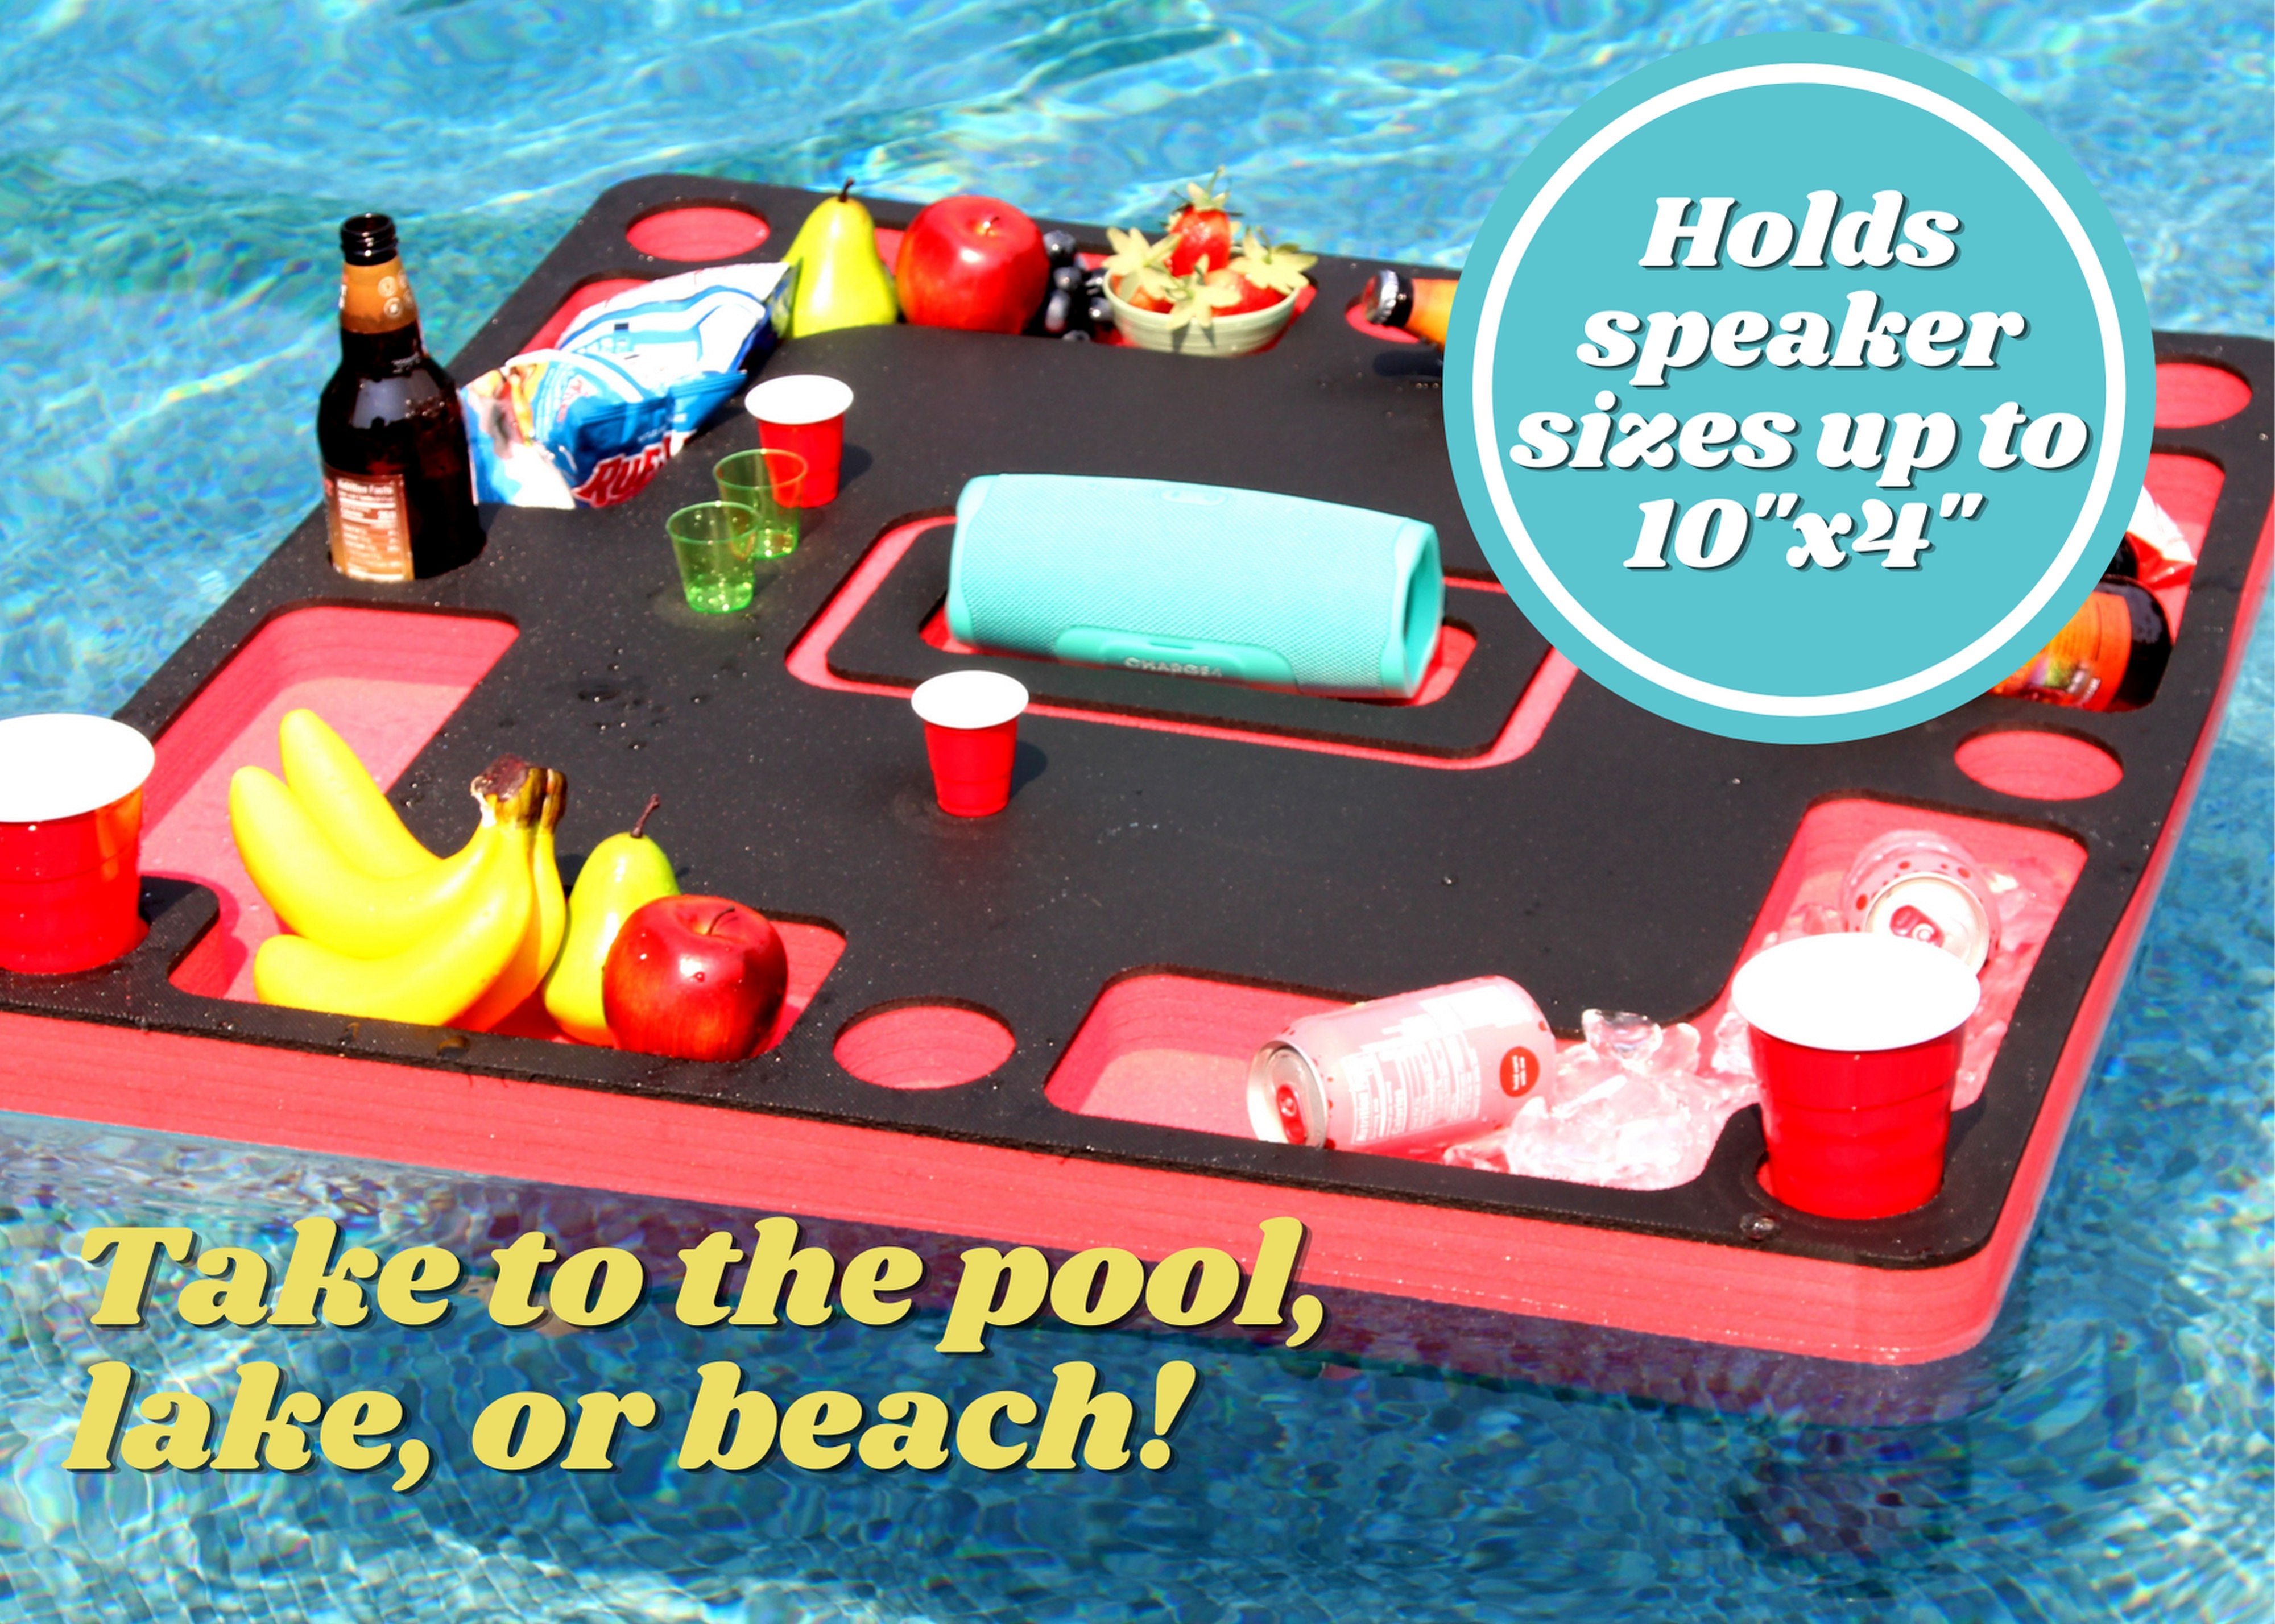 Waterproof Speaker Table Tray Drink Holders for Pool or Beach Float Durable Foam UV Resistant Compatible JBL tooth Charge FLIP more 36 Inch